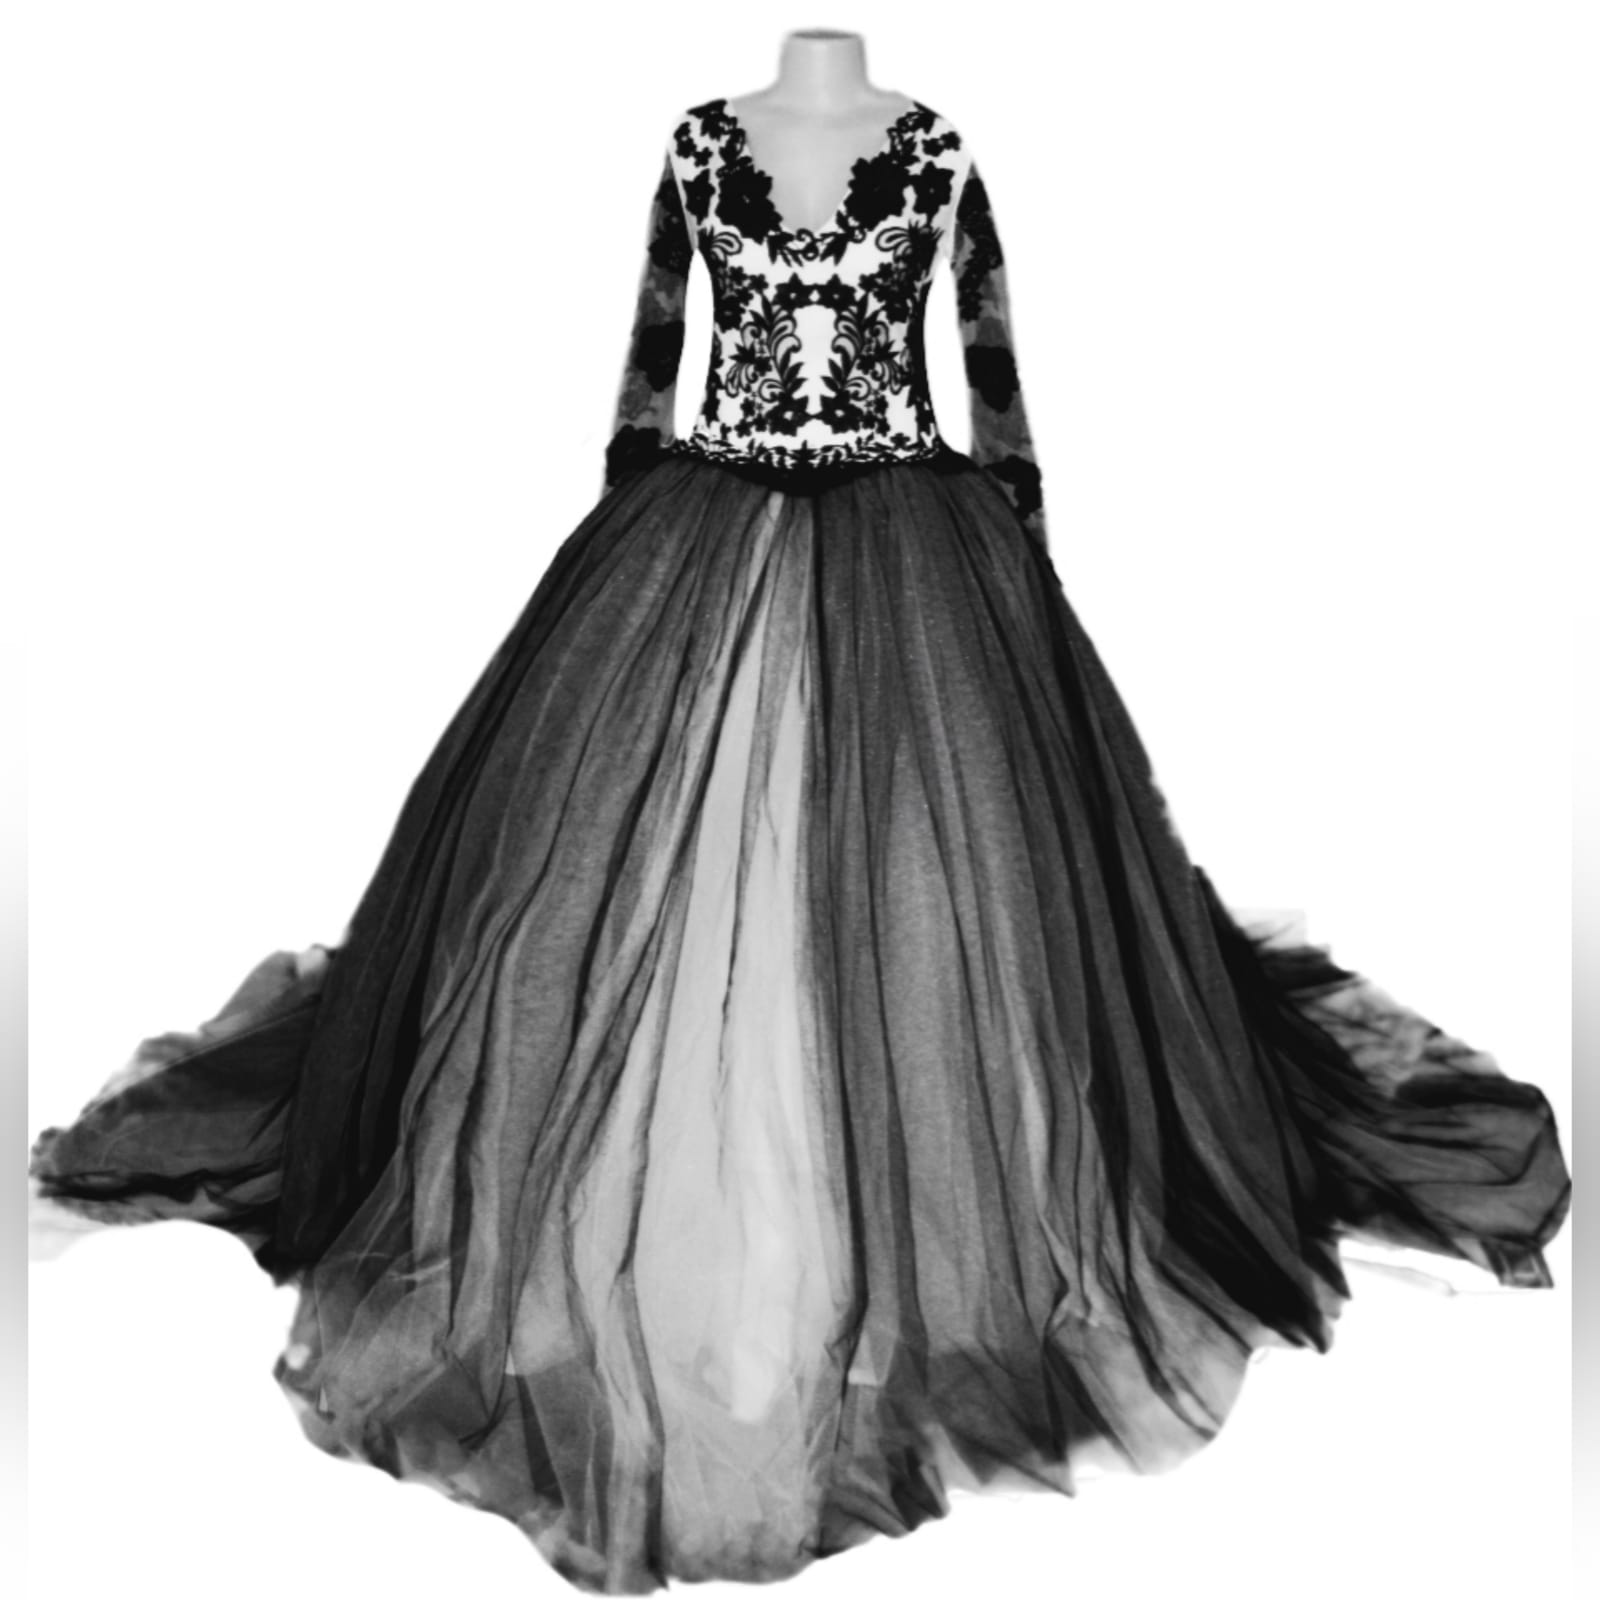 Black and white plus size ball gown wedding dress 1 black and white plus size ball gown wedding dress, bodice in white, detailed with black lace. Illusion lace long sleeves with a poofy black and white tulle bottom. With a train.